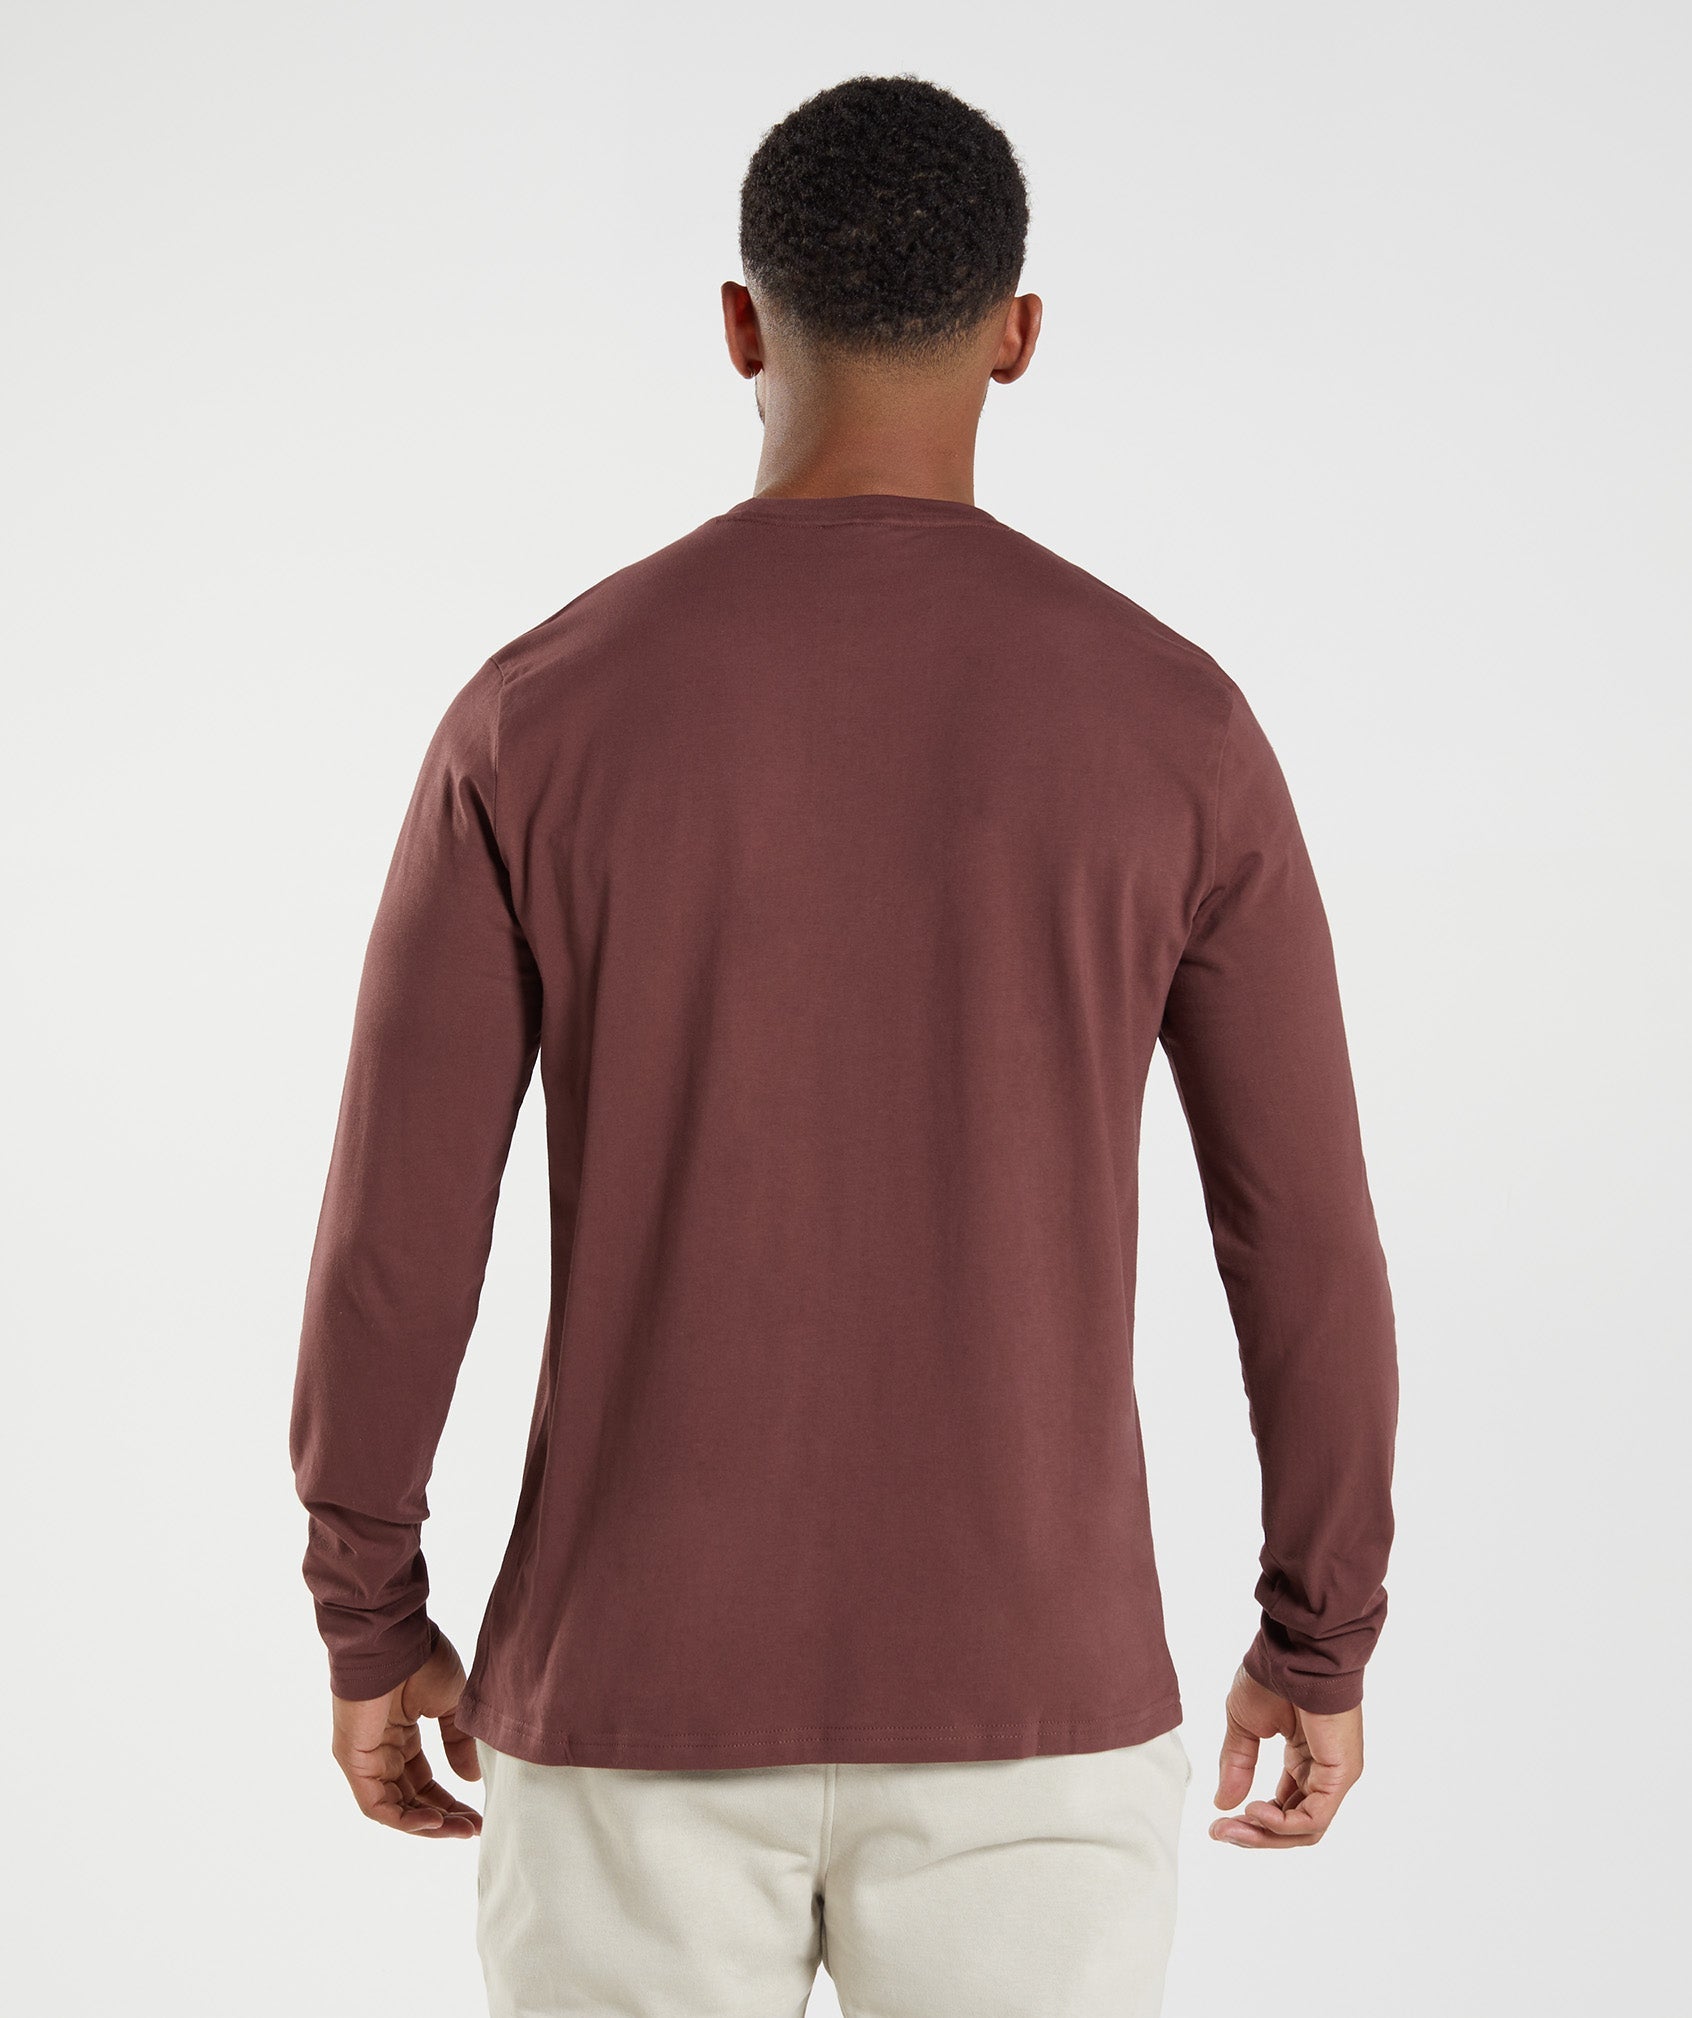 Crest Long Sleeve T-Shirt in Cherry Brown